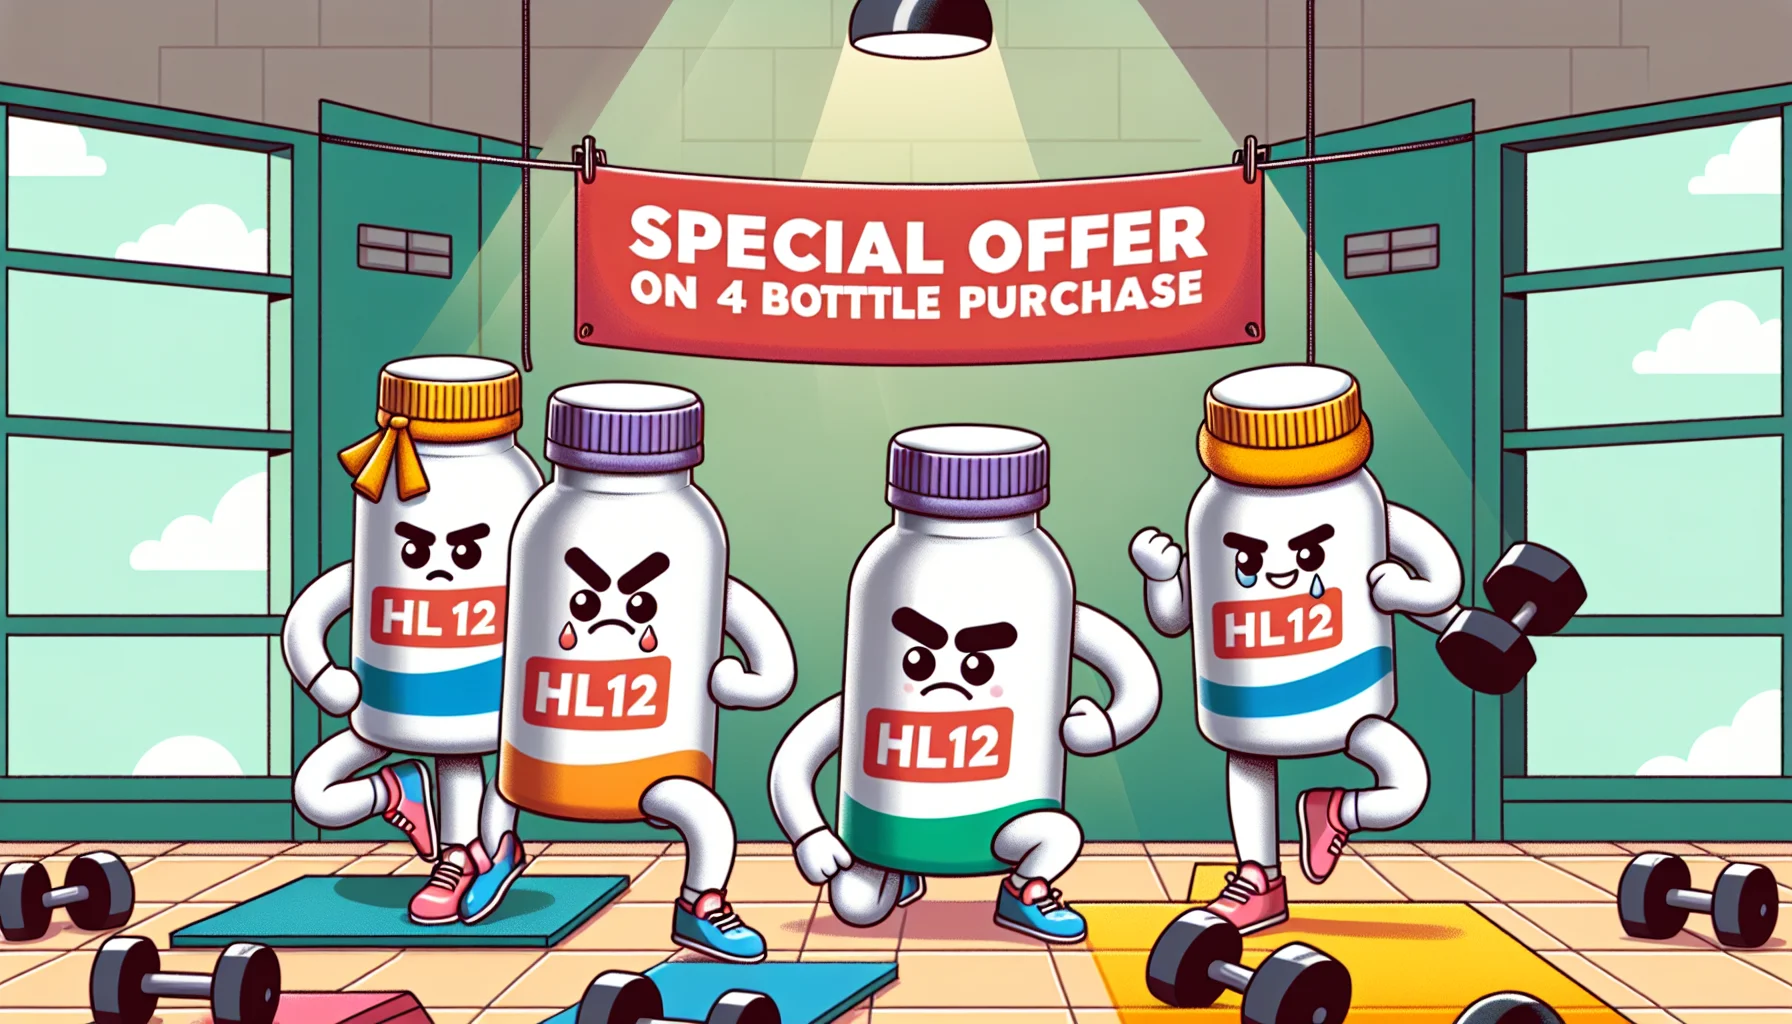 Depict a humorous scenario where four bottles of a generic health supplement labeled 'HL12: Special Offer' are engaging in an exercise class together. Create the setting as an upbeat, colorful gym. The bottles could be seen wearing sweatbands and performing exercises such as aerobics or weight lifting. Their shapes could even be slightly anthropomorphized to make them akin to cartoon characters. In the background, include a banner with words 'Special Offer on 4 Bottle Purchase', worded in a playful, enticing way to encourage the viewer's participation.